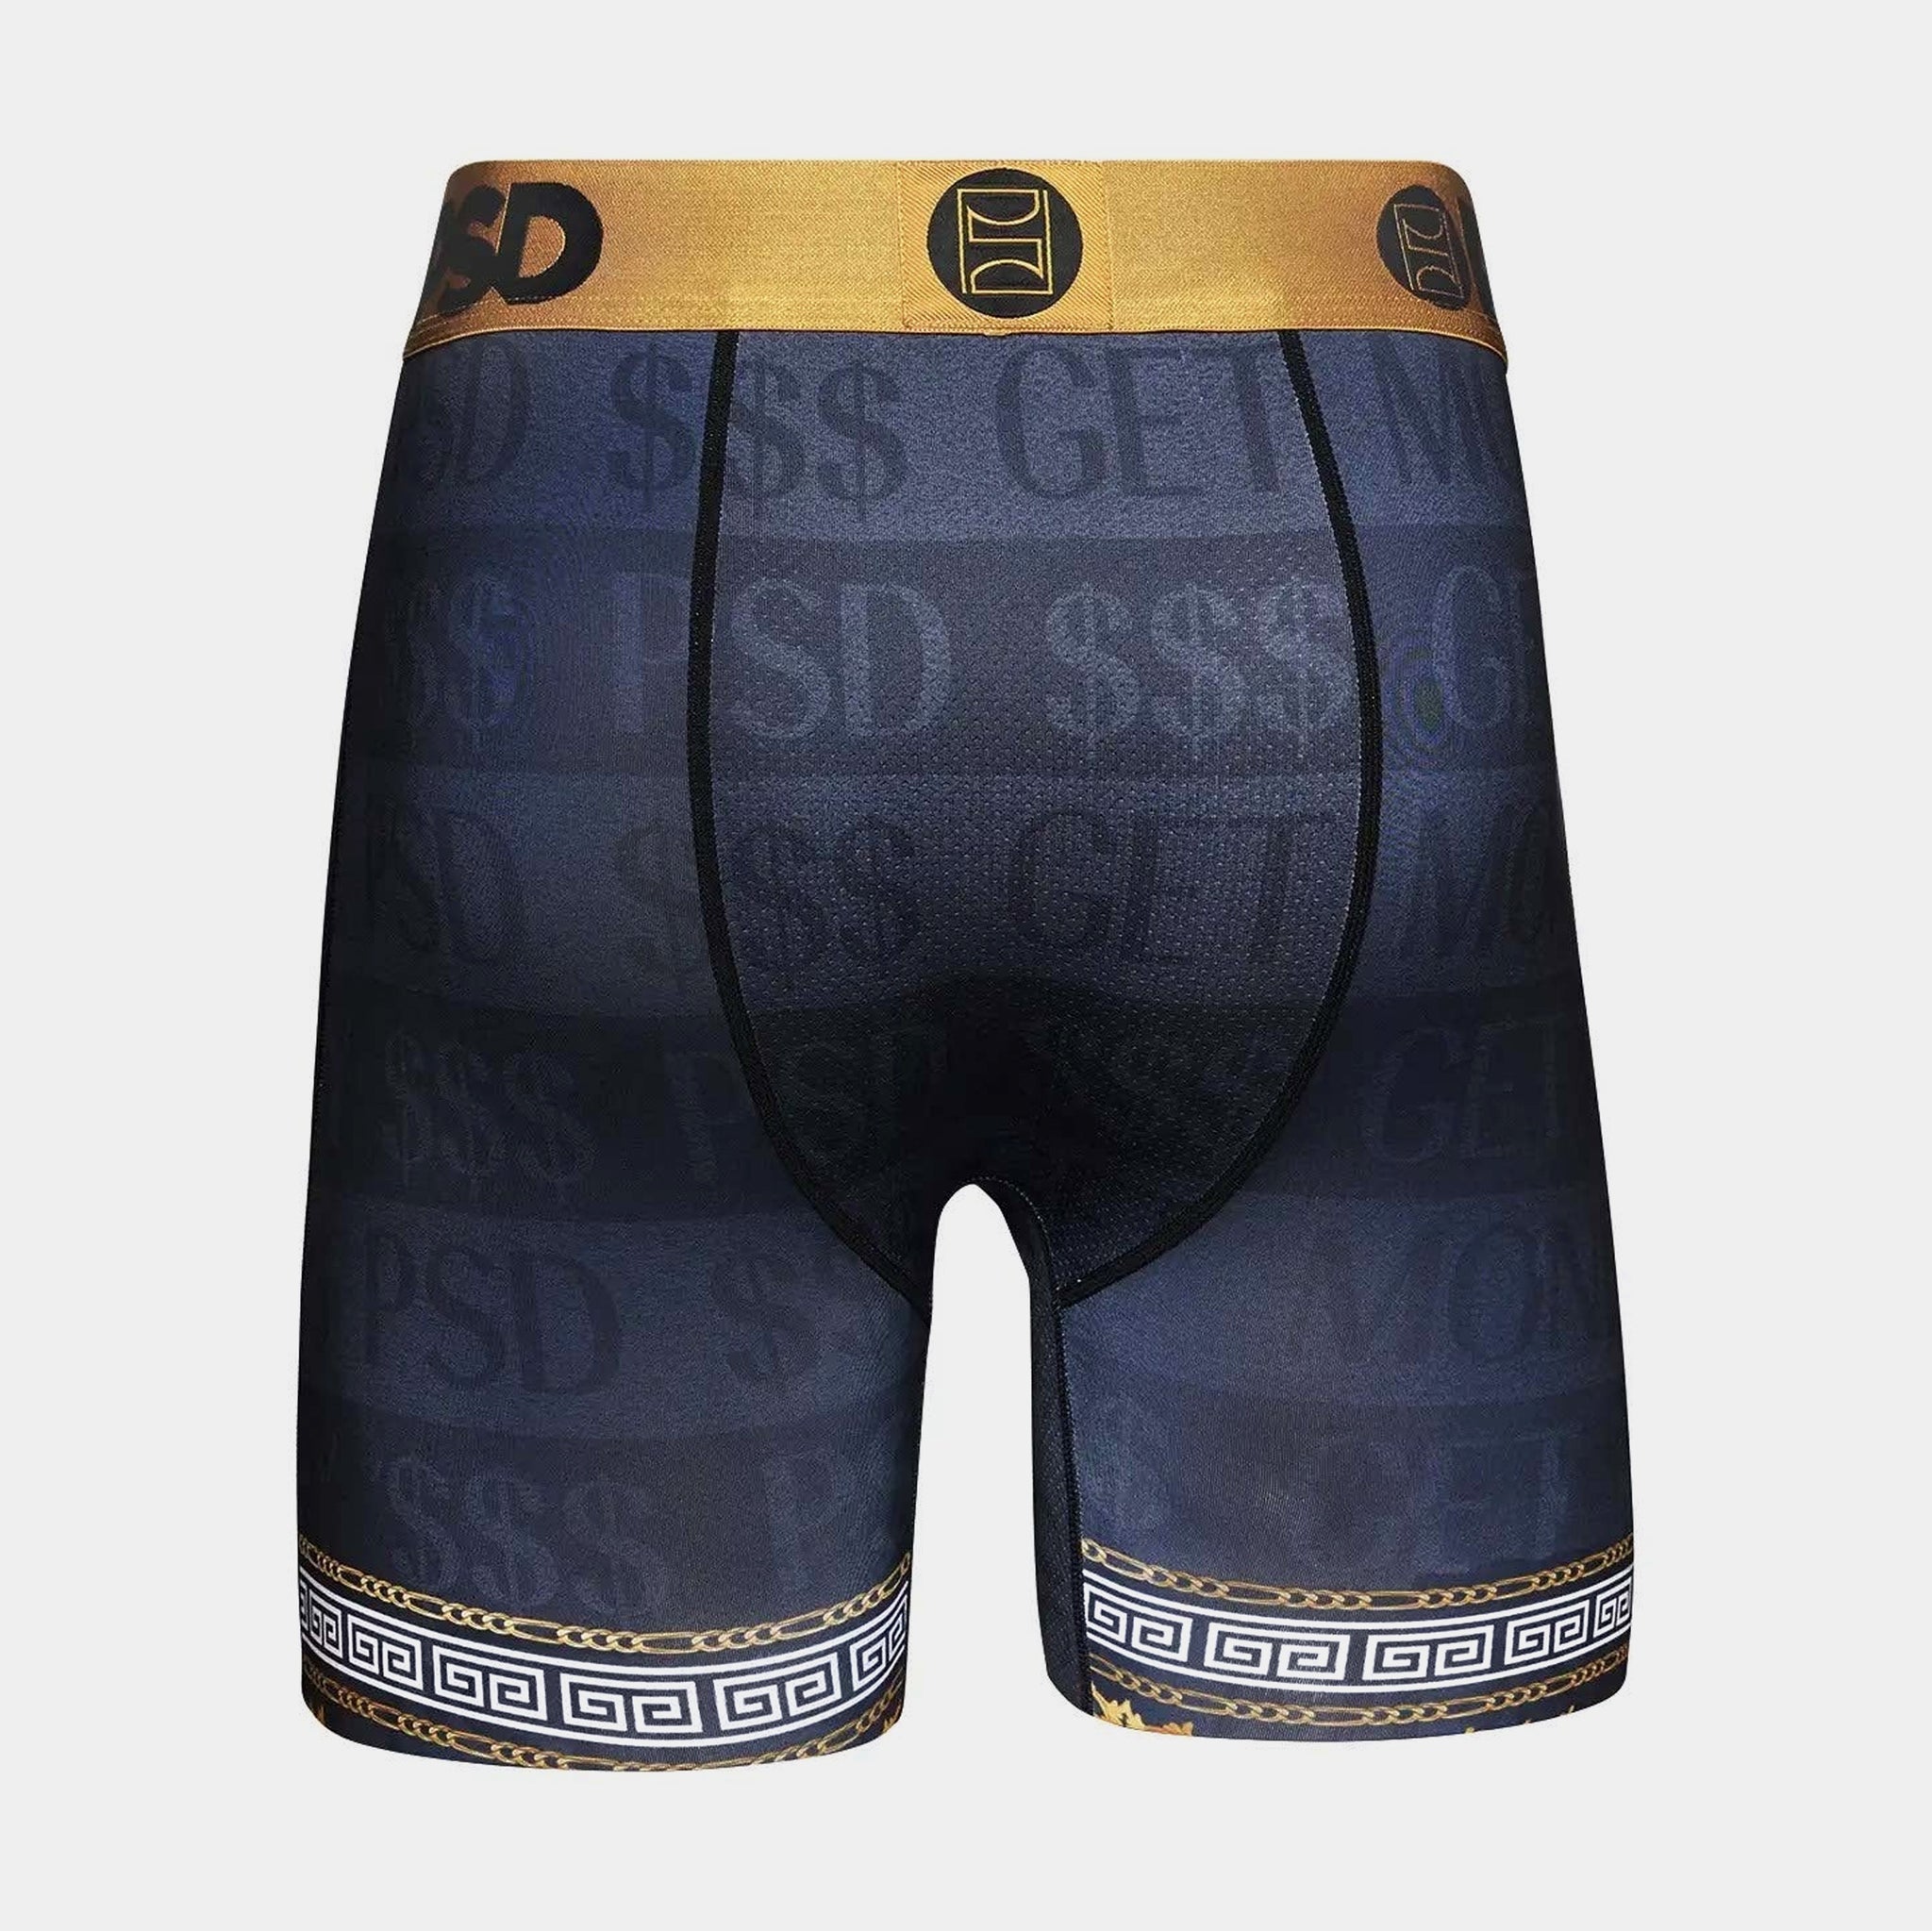 Psd Money Luxe Mens Boxers Black Gold Free Shipping 123180057 – Shoe Palace